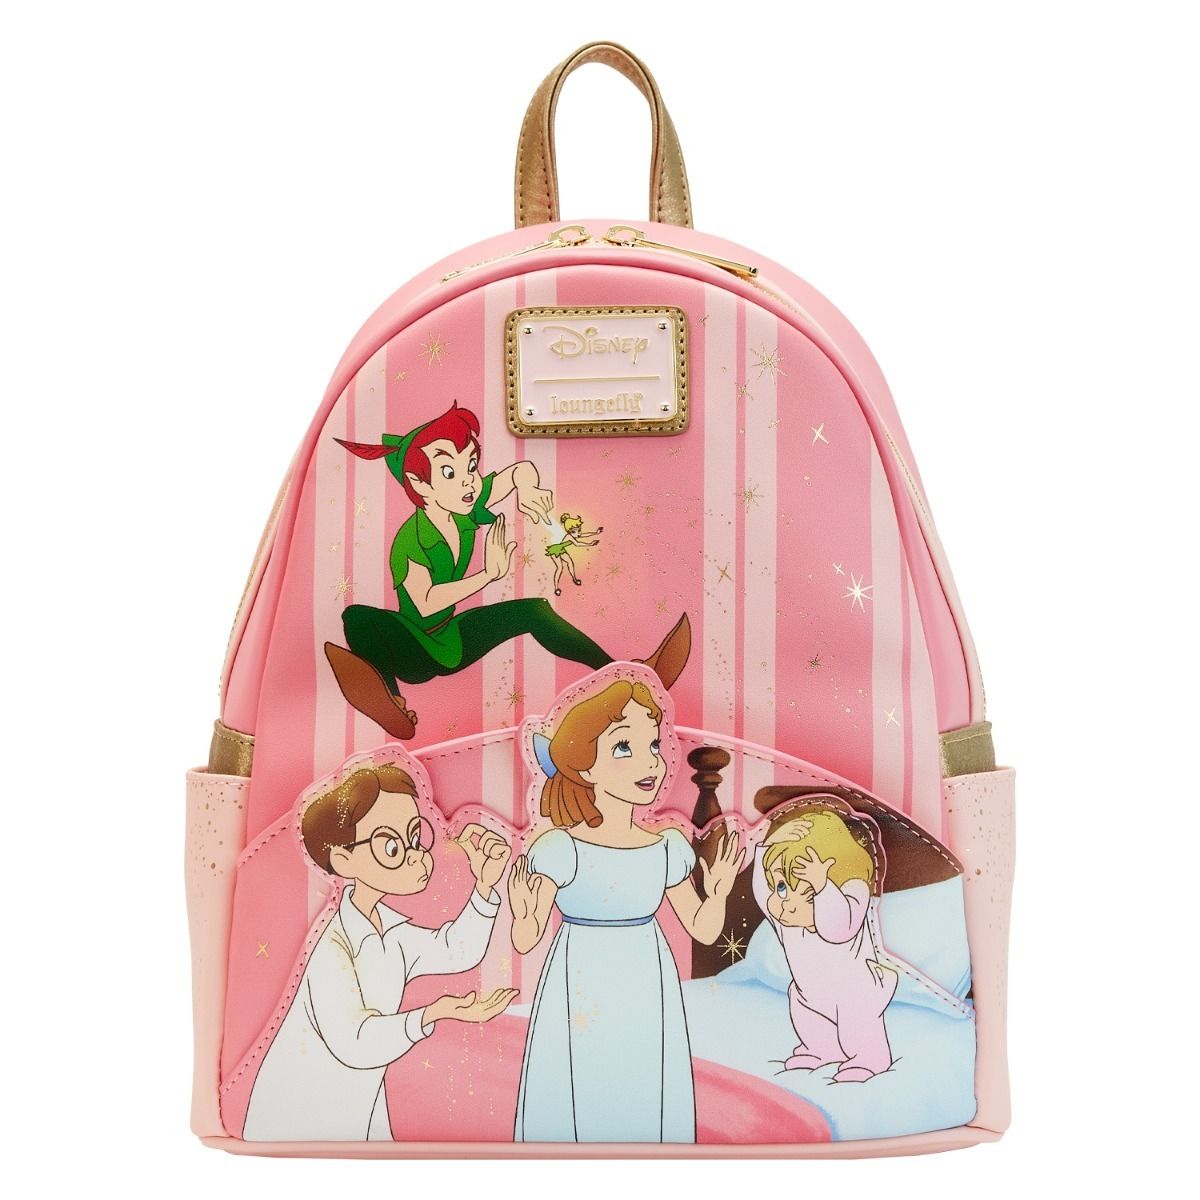 Buy Your Sleeping Beauty Princess Castle Loungefly Backpack (Free Shipping)  - Merchoid